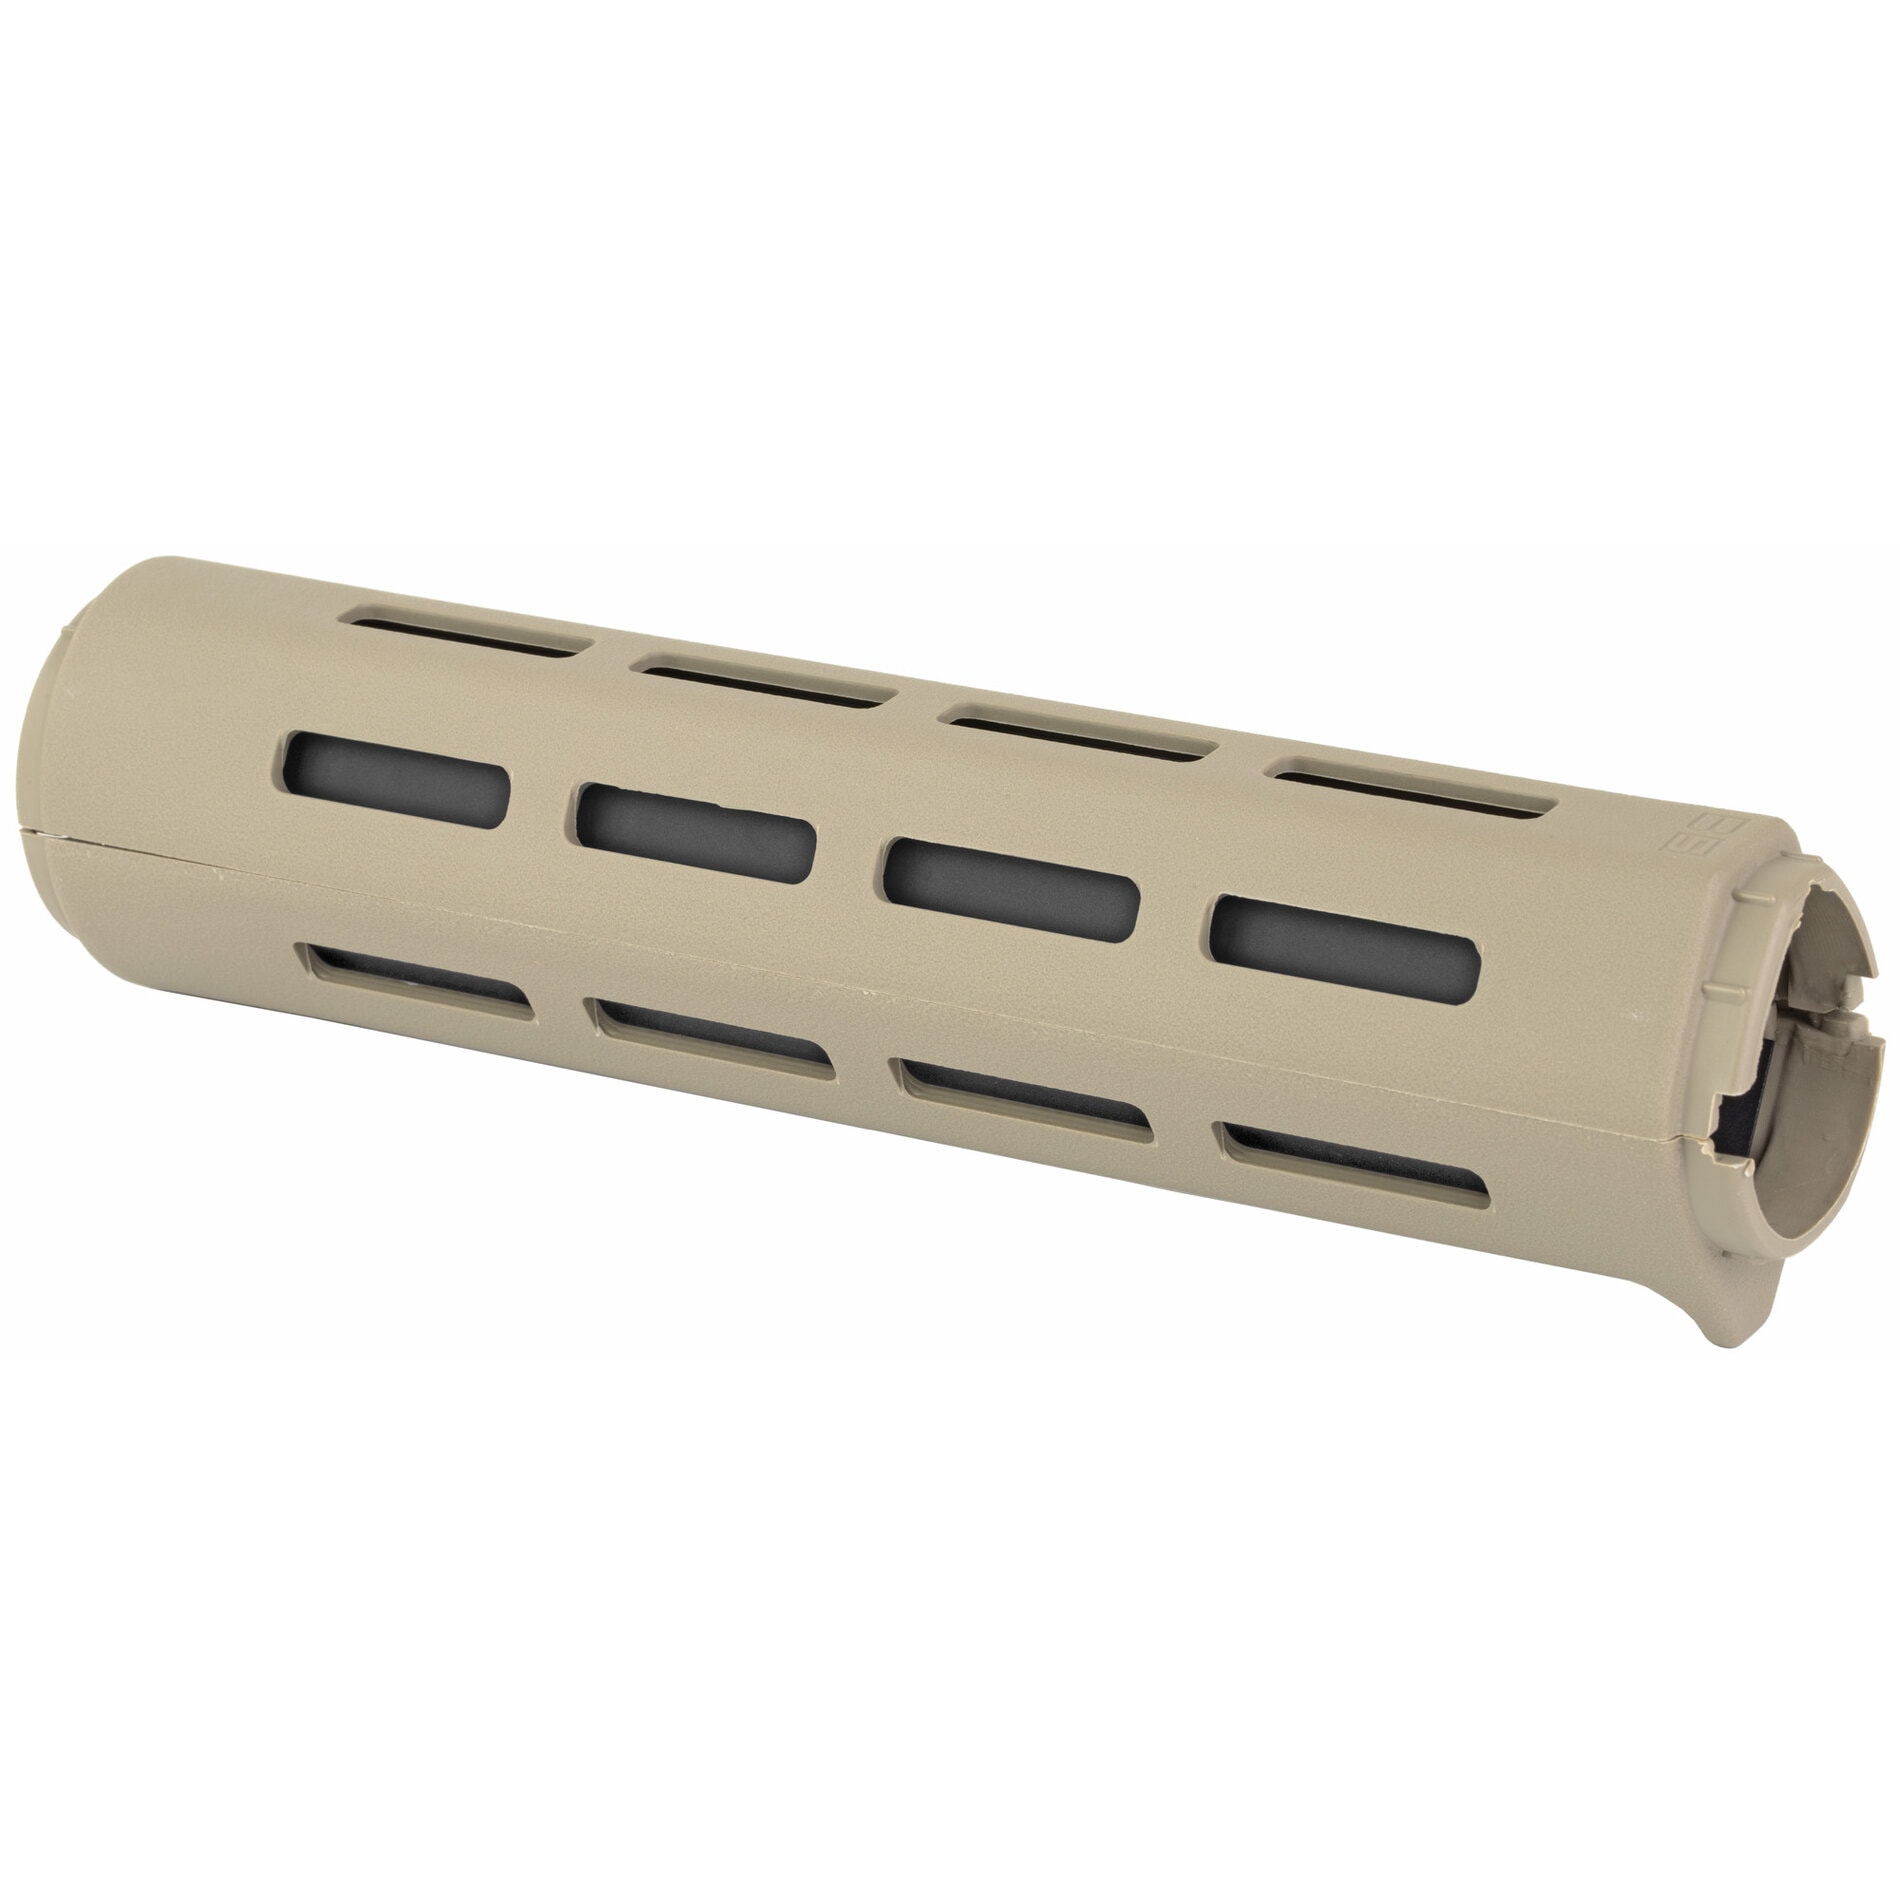 B5 Systems Drop-in Midlength Handguard for AR-15